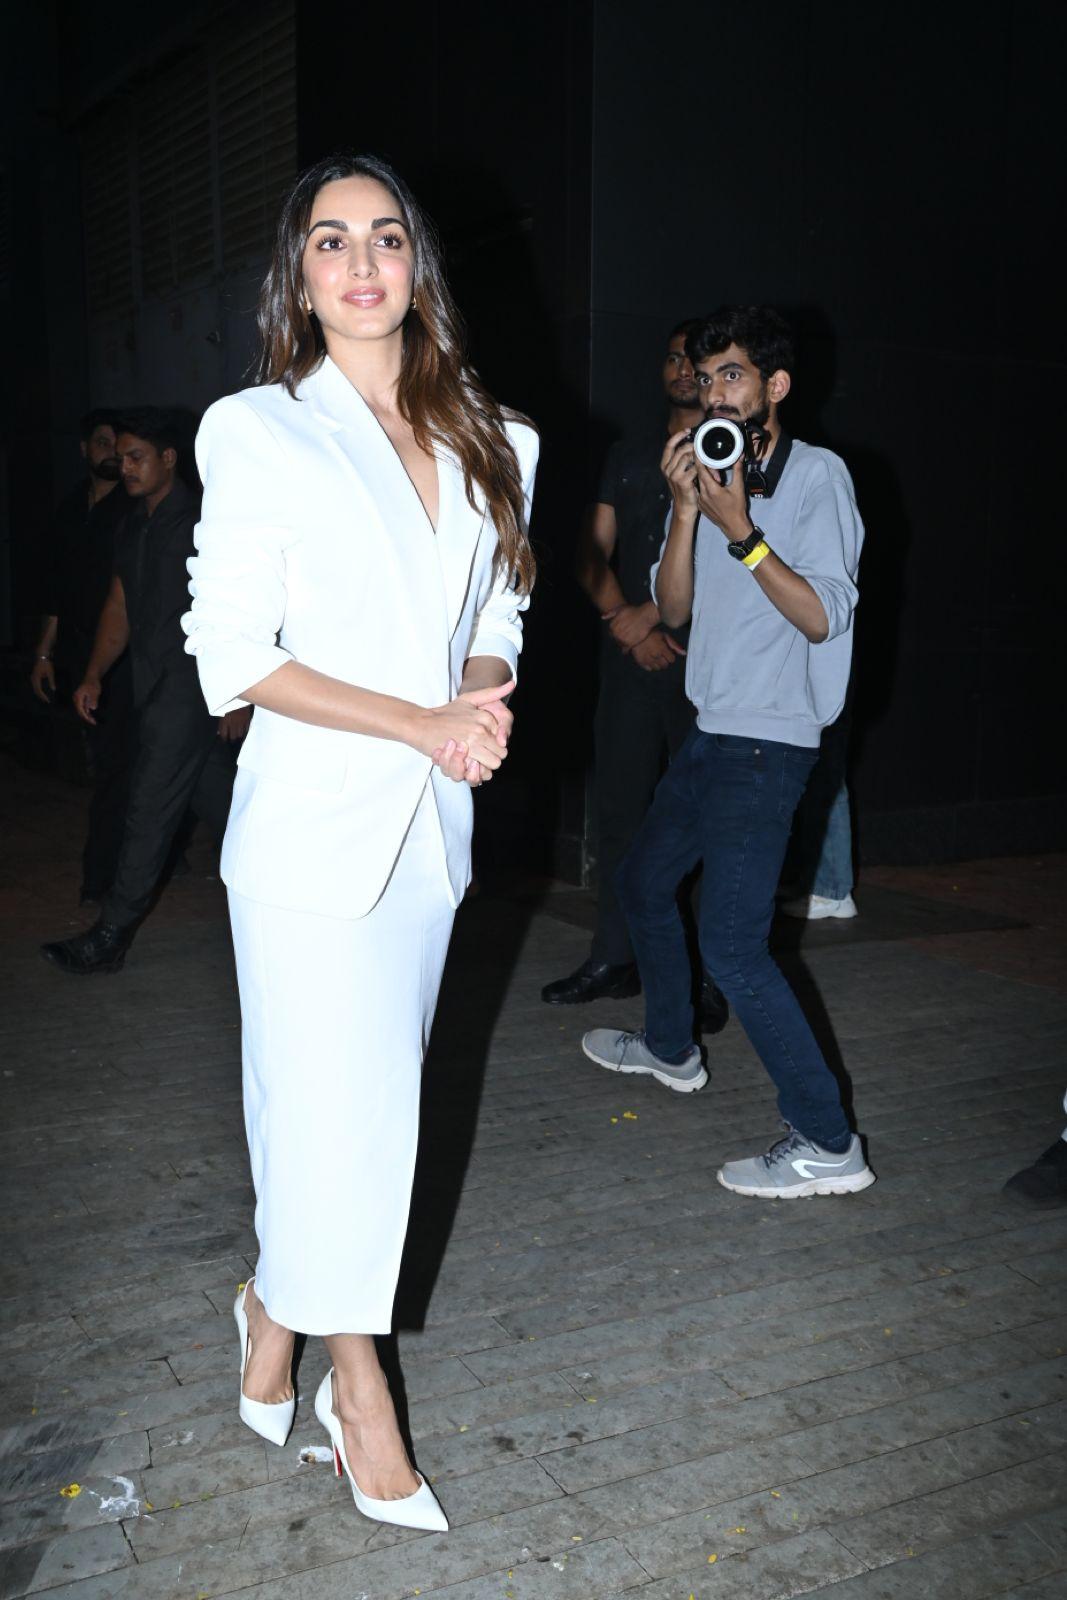 She looked effortlessly elegant and chic in a monotonous, all white skirt set and an infectious smile to top it all off